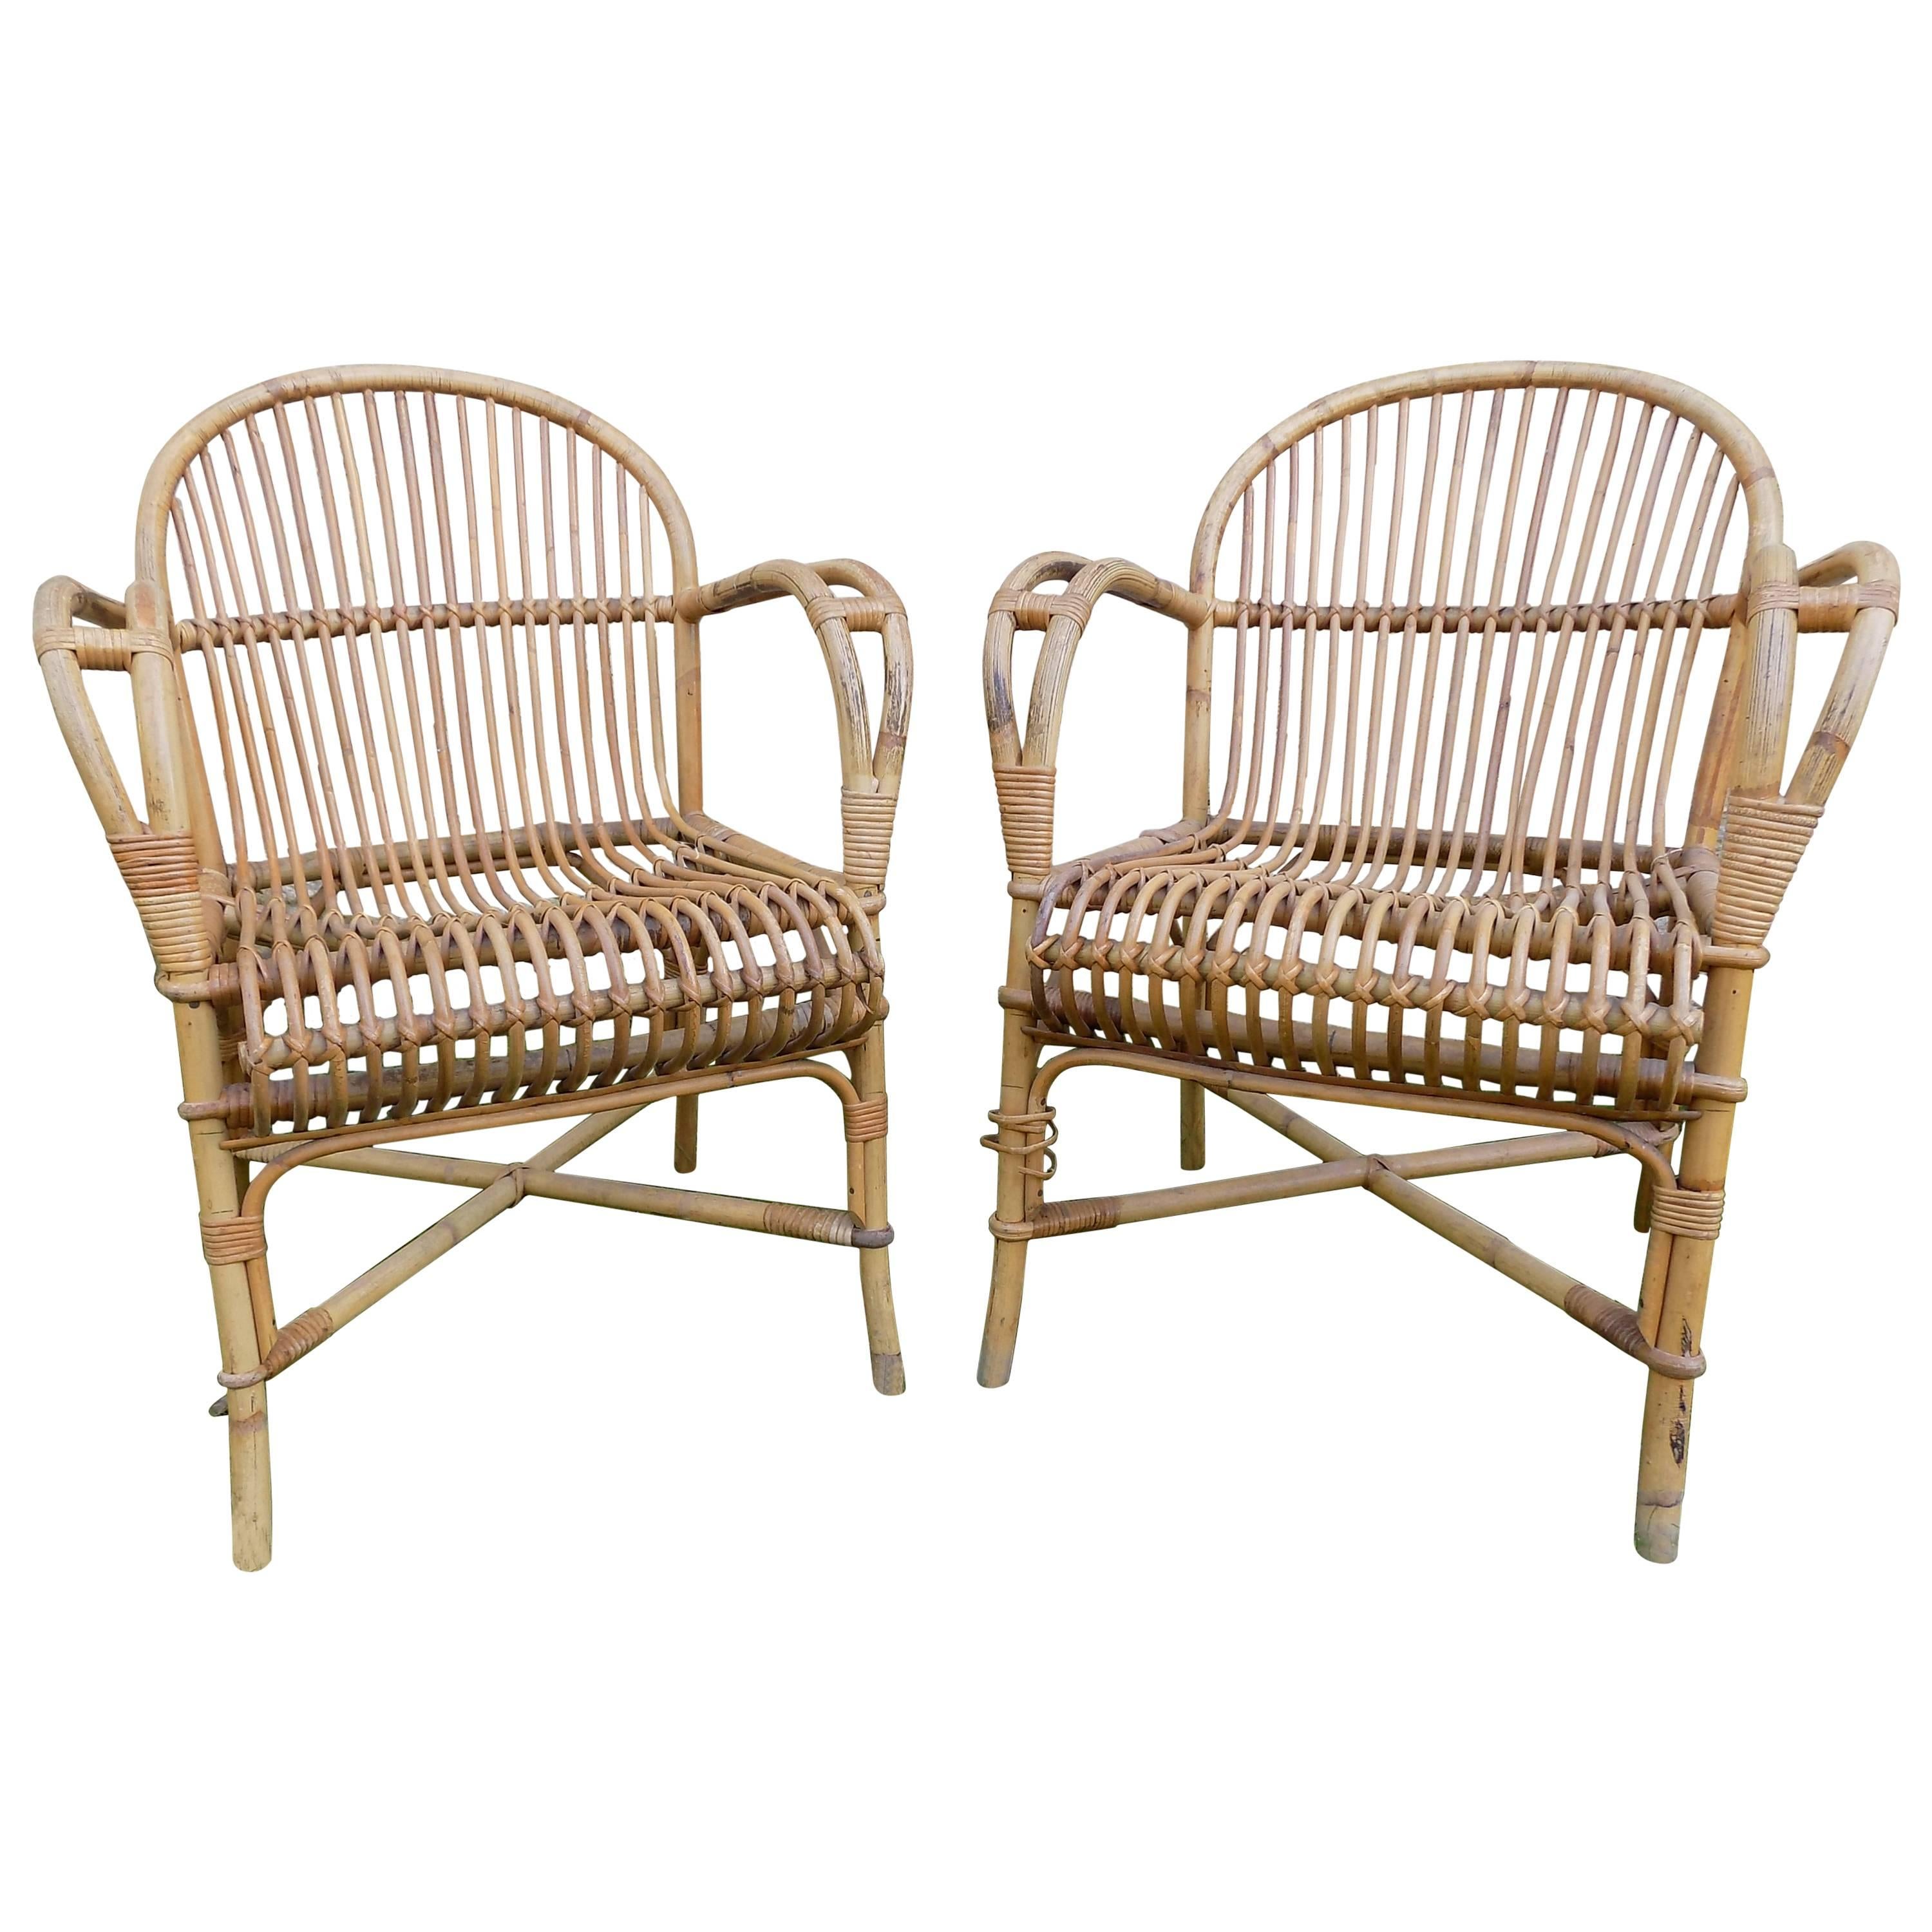 Beautiful Pair of Wicker Armchair by Audoux Minet, circa 1960